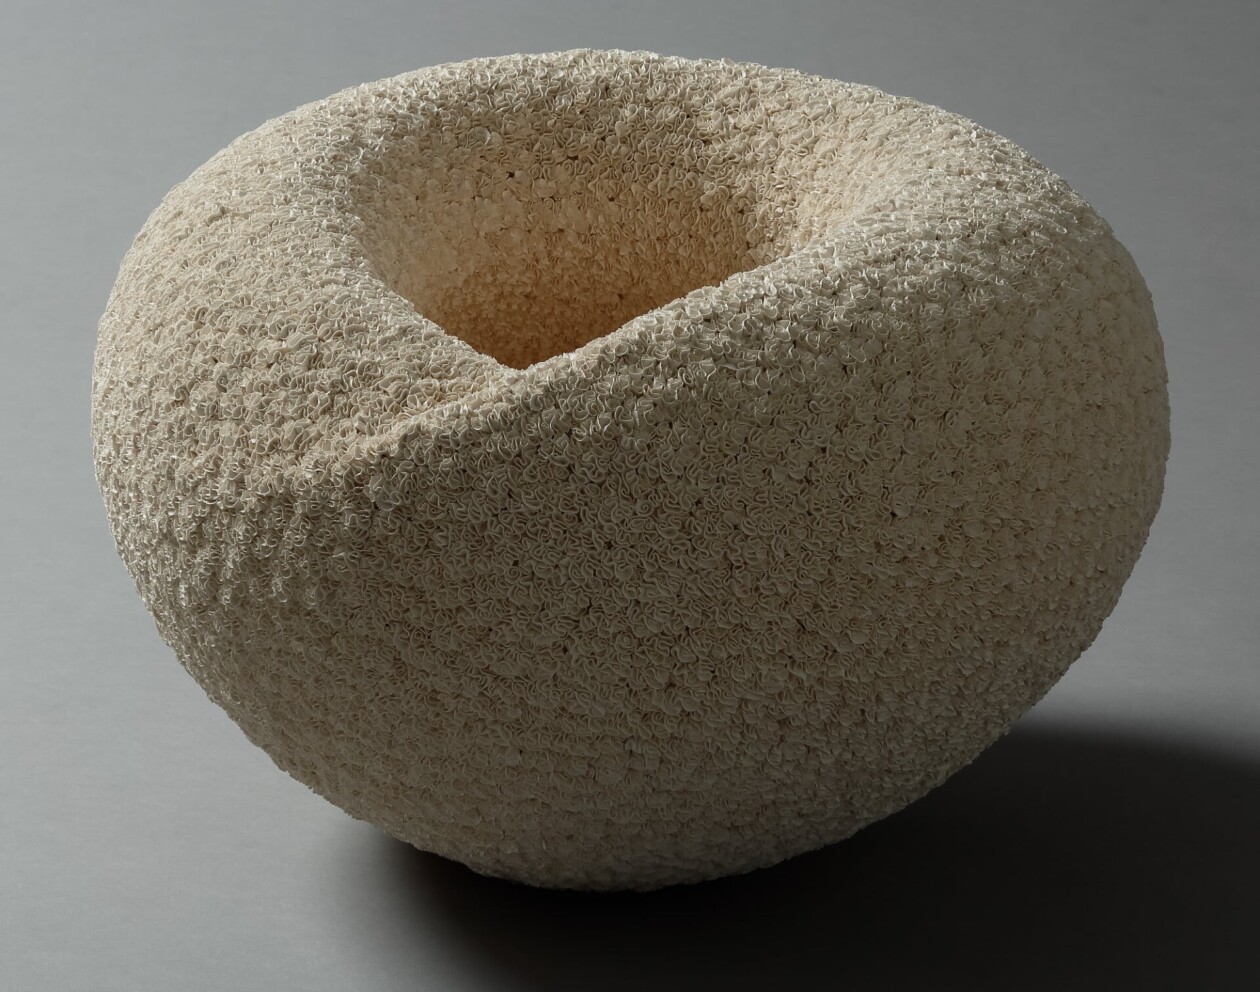 Intricately Coiled Porcelain Sculptures By Hattori Makiko (5)